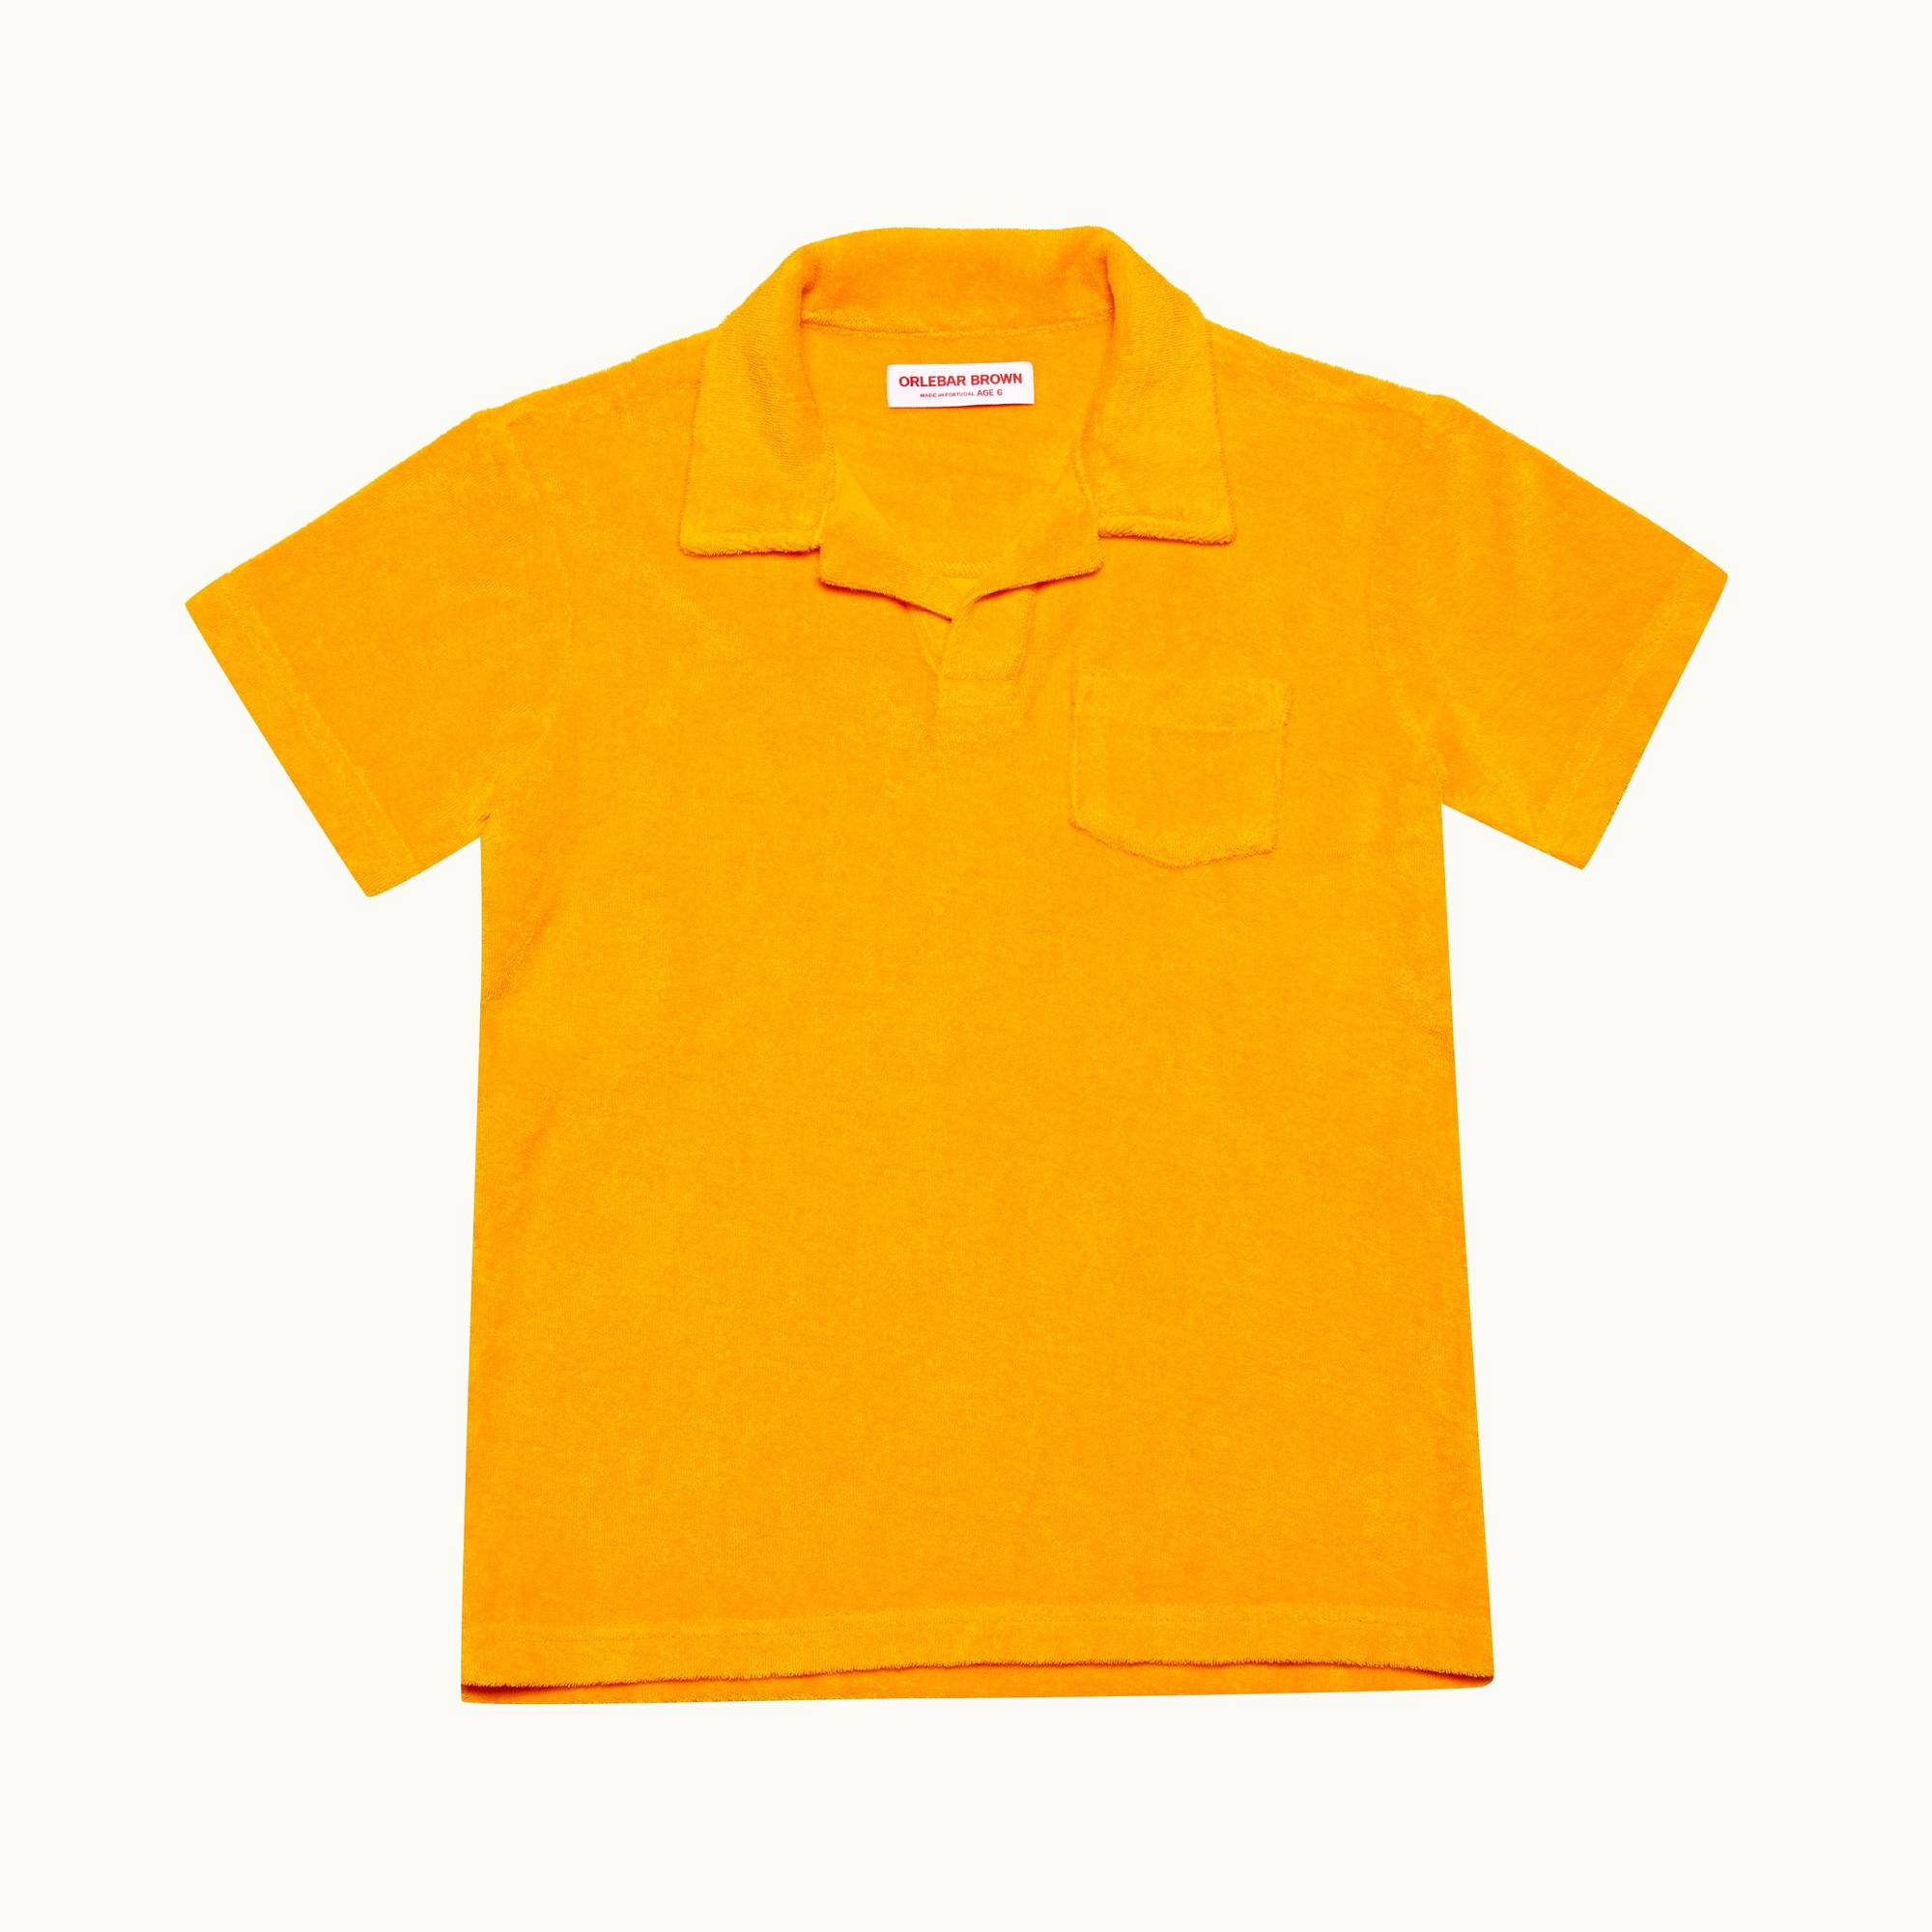 Digby Towelling - Childrens Kids' Beacon Organic Towelling Resort Polo Shirt